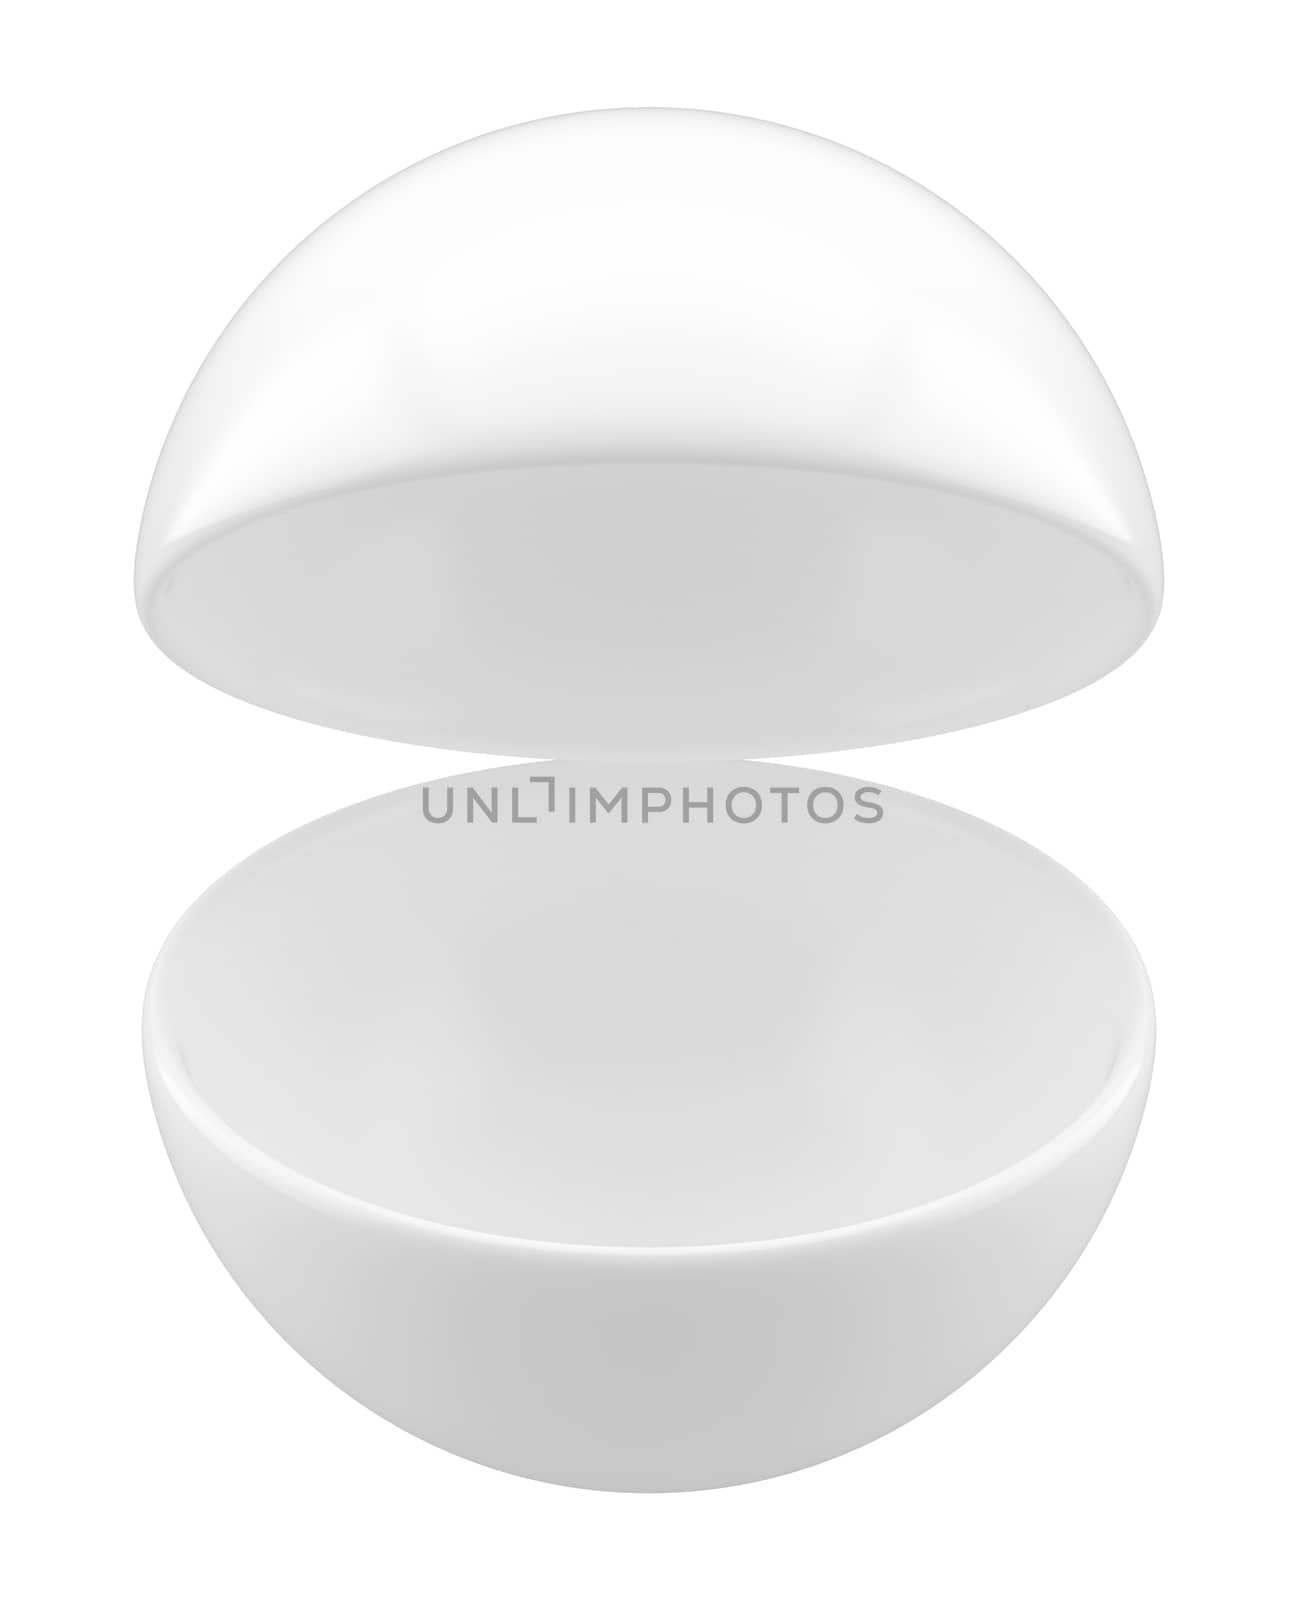 Open Sphere POS POI Blank Empty Advertising Retail Stand. Isolated On White Background. Mock Up Template For Your Design. 3D Illustration